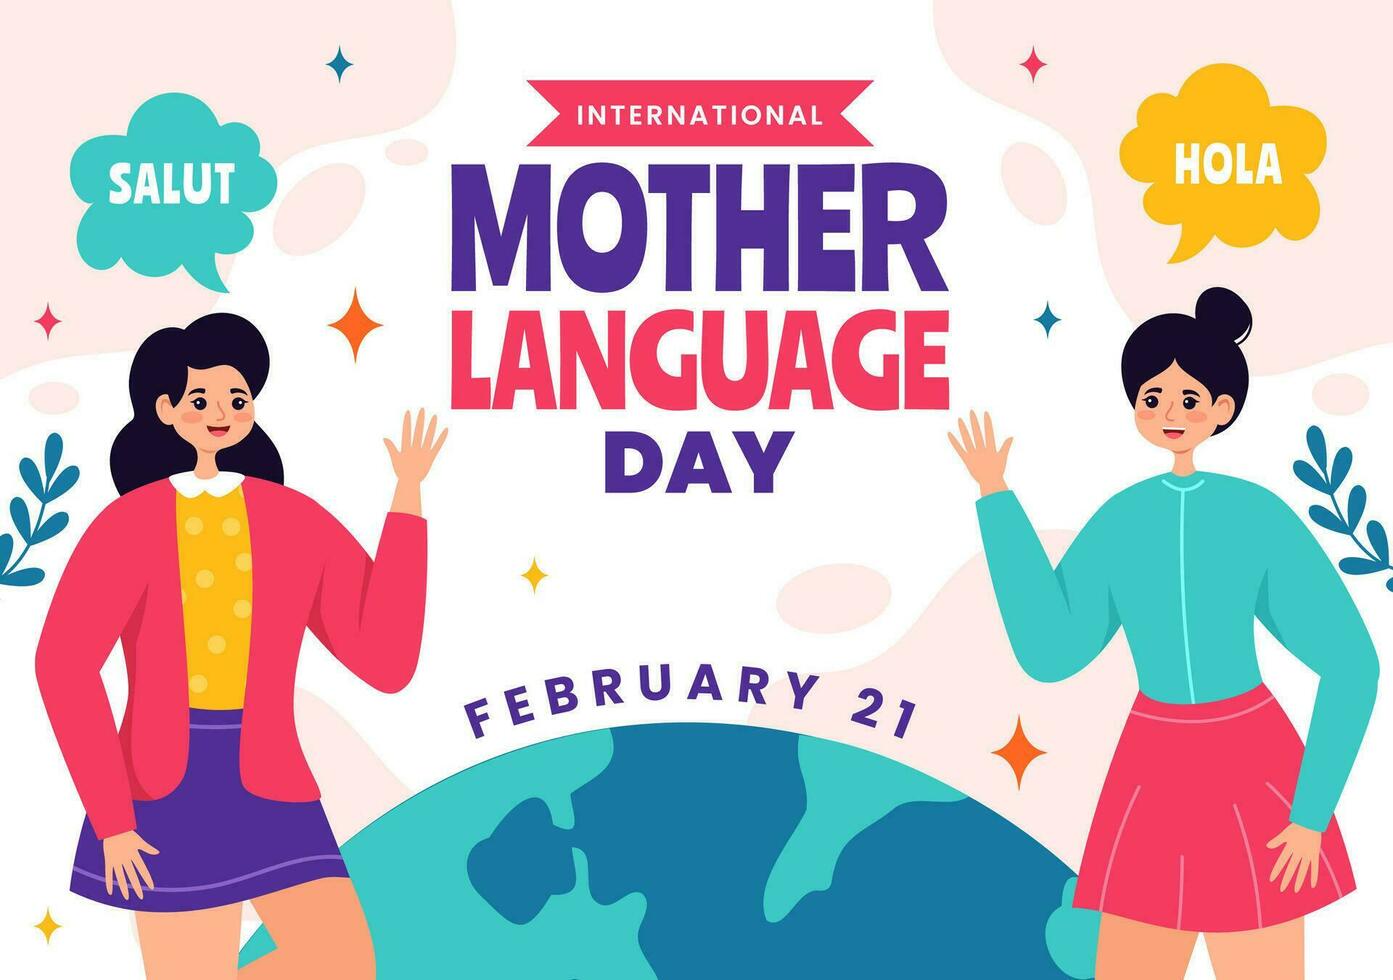 International Mother Language Day Vector Illustration on February 21 with Mom Says Hello in Several World Languages in Flat Kids Cartoon Background